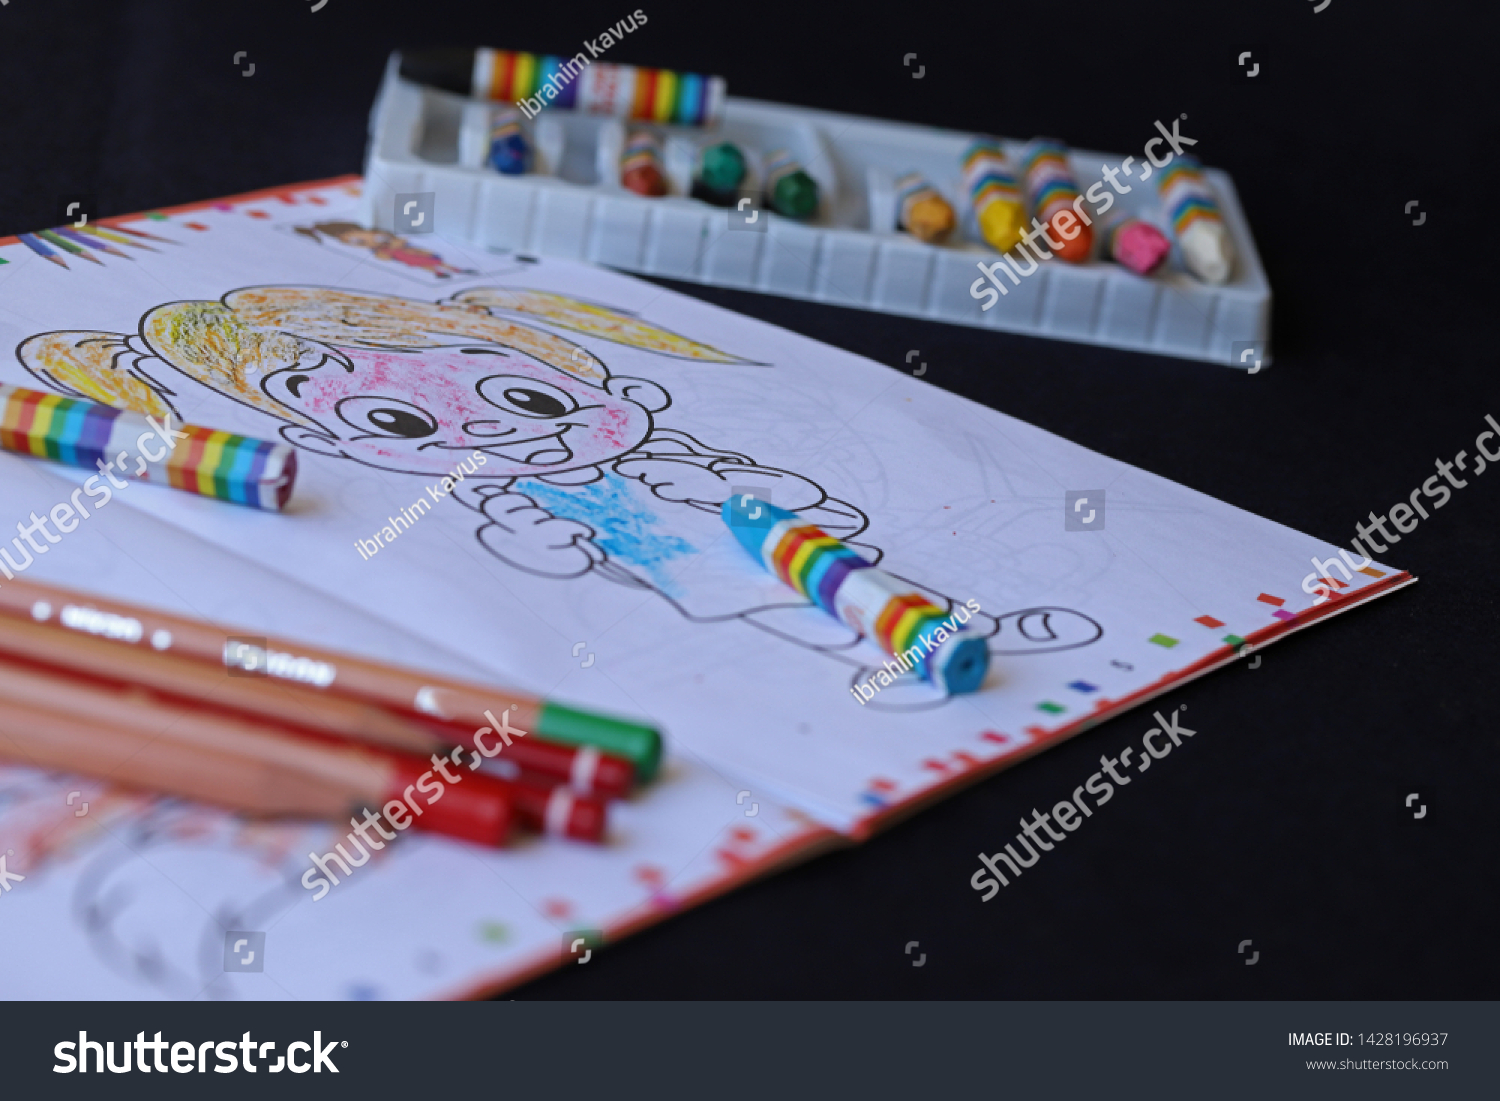 Download Childrens Coloring Books Crayons Over Black Stock Photo Edit Now 1428196937